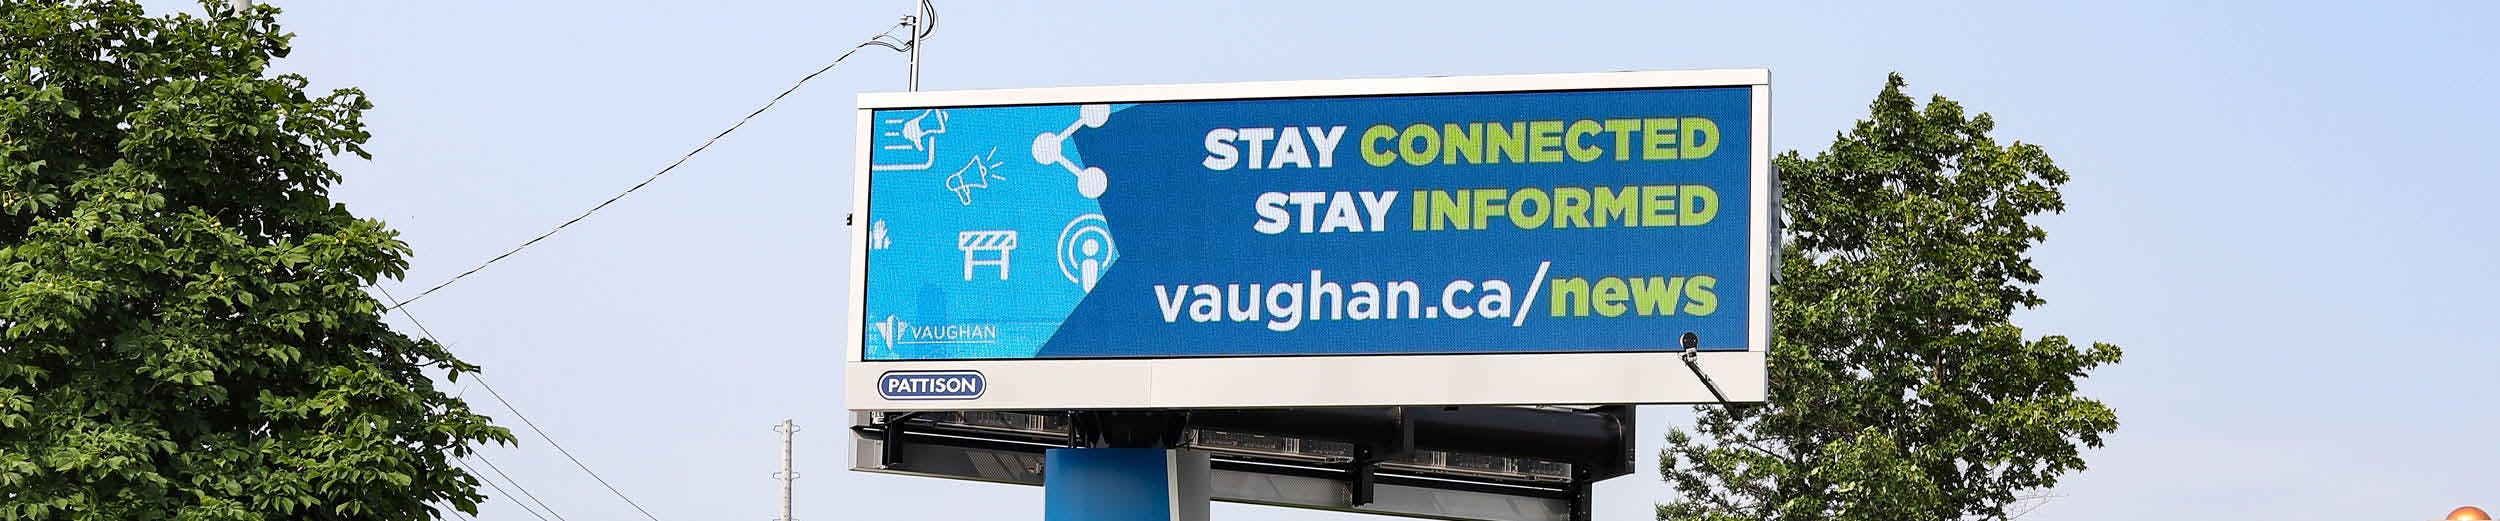 A blue sky with trees in the background and a digital billboard in the foreground with the words Stay Connected Stay Informed